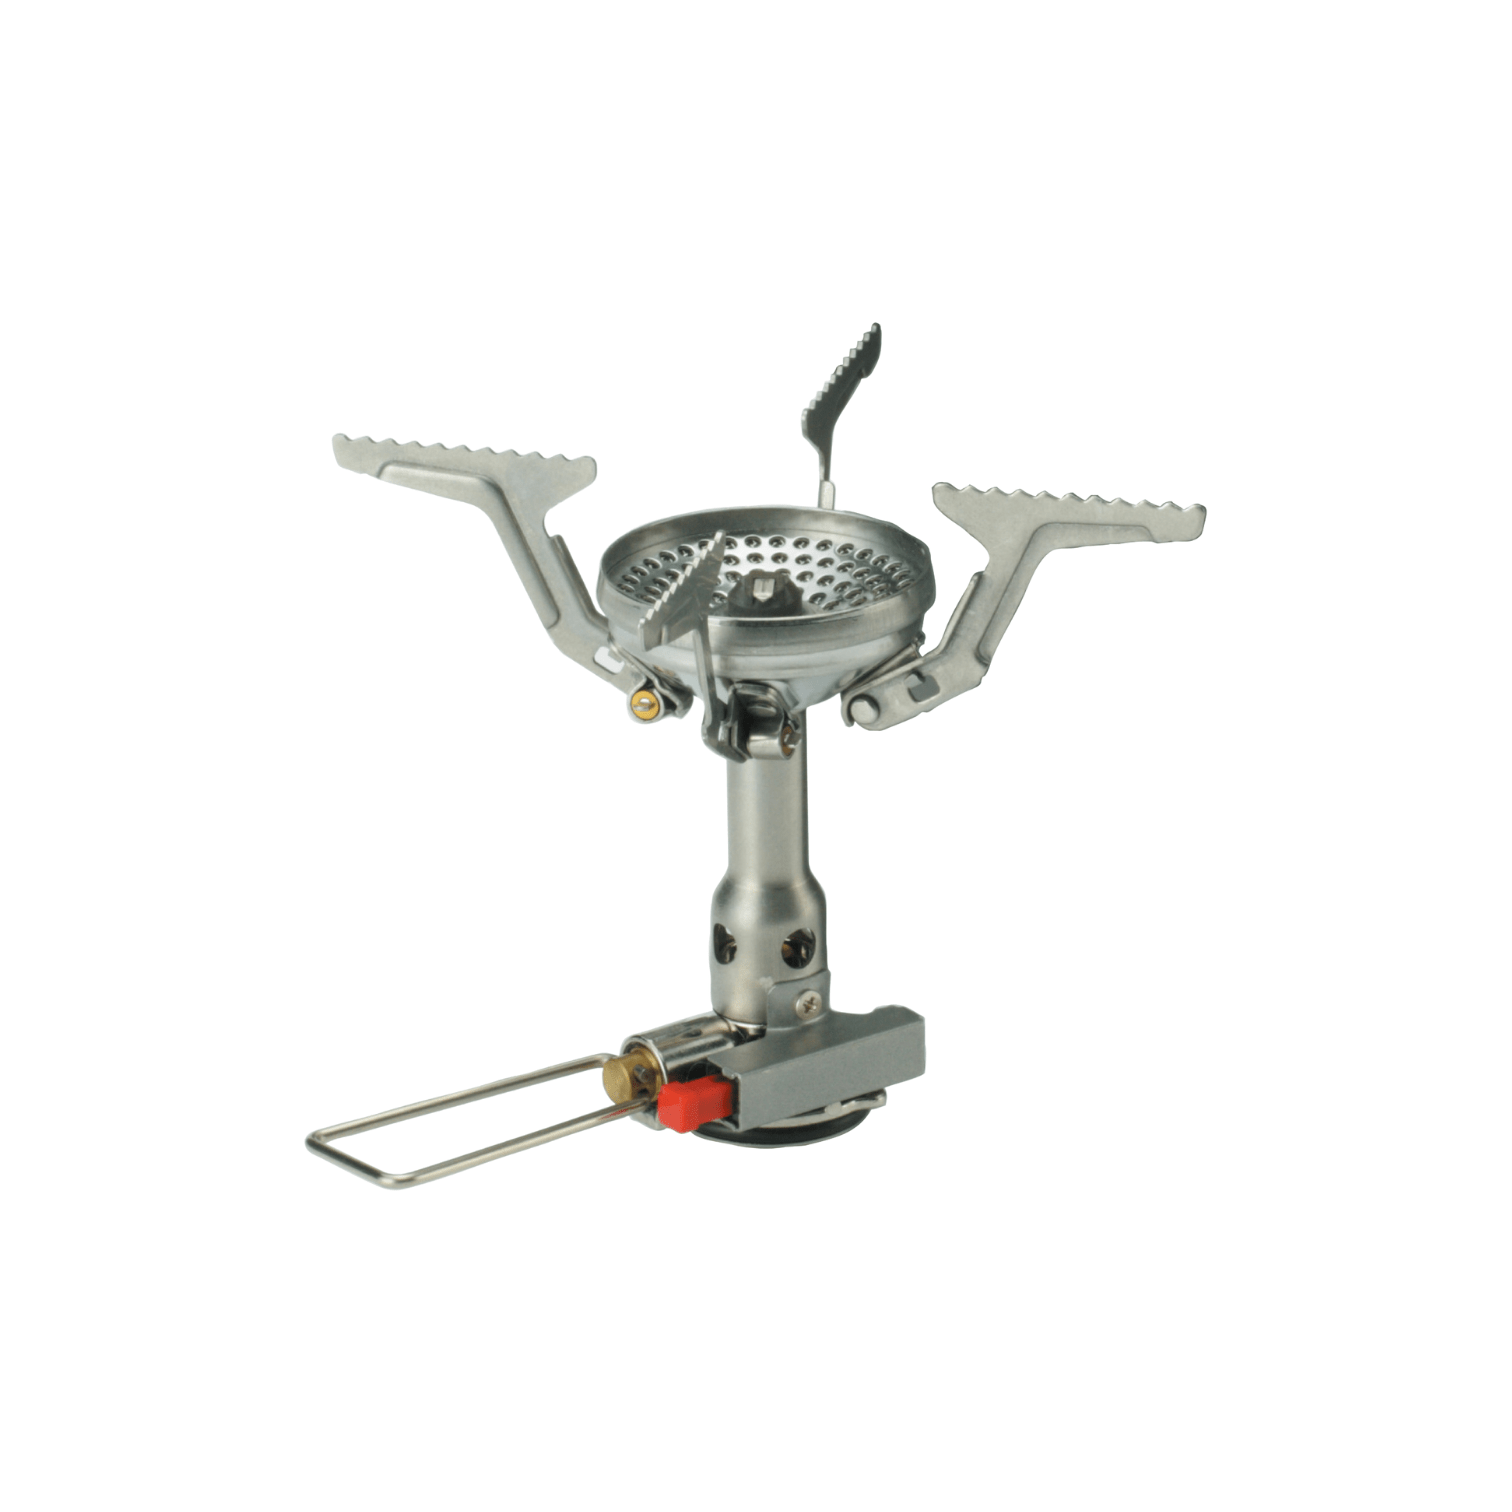 Alocs Portable And Wind Resistance Camping Gas Stove